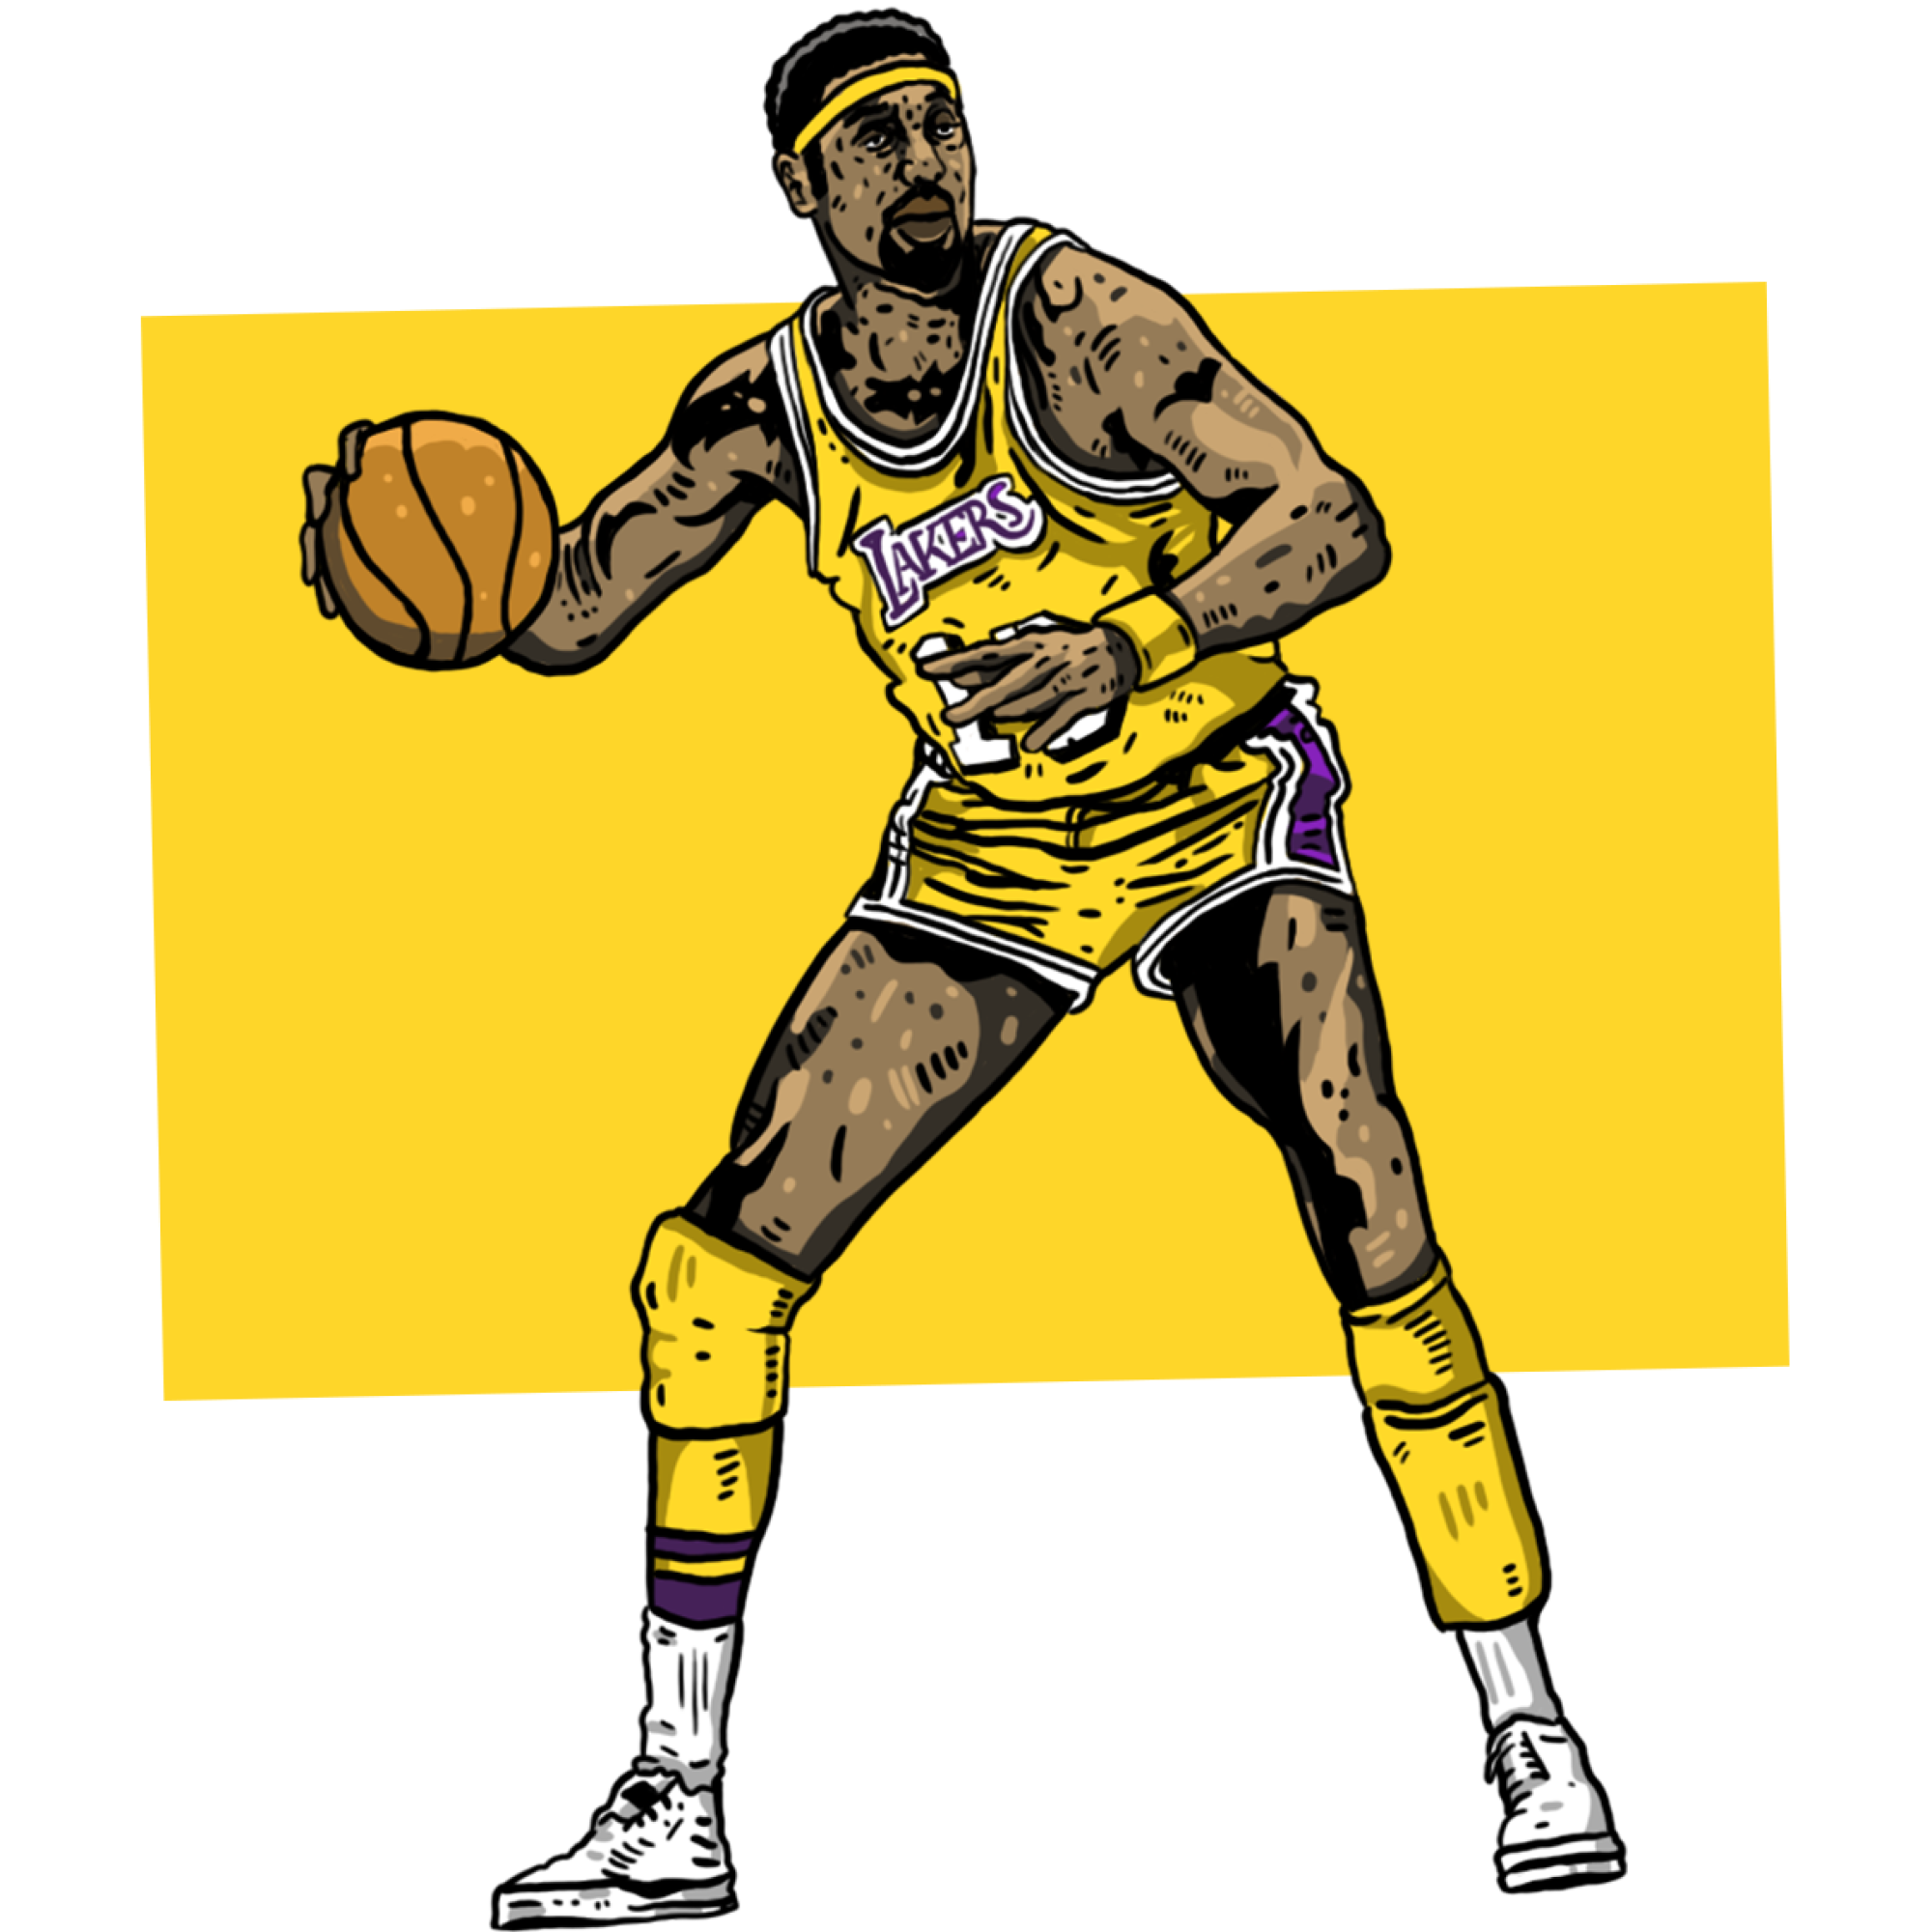 Illustration of Wilt Chamberlain in a yellow jersey dribbling a ball.